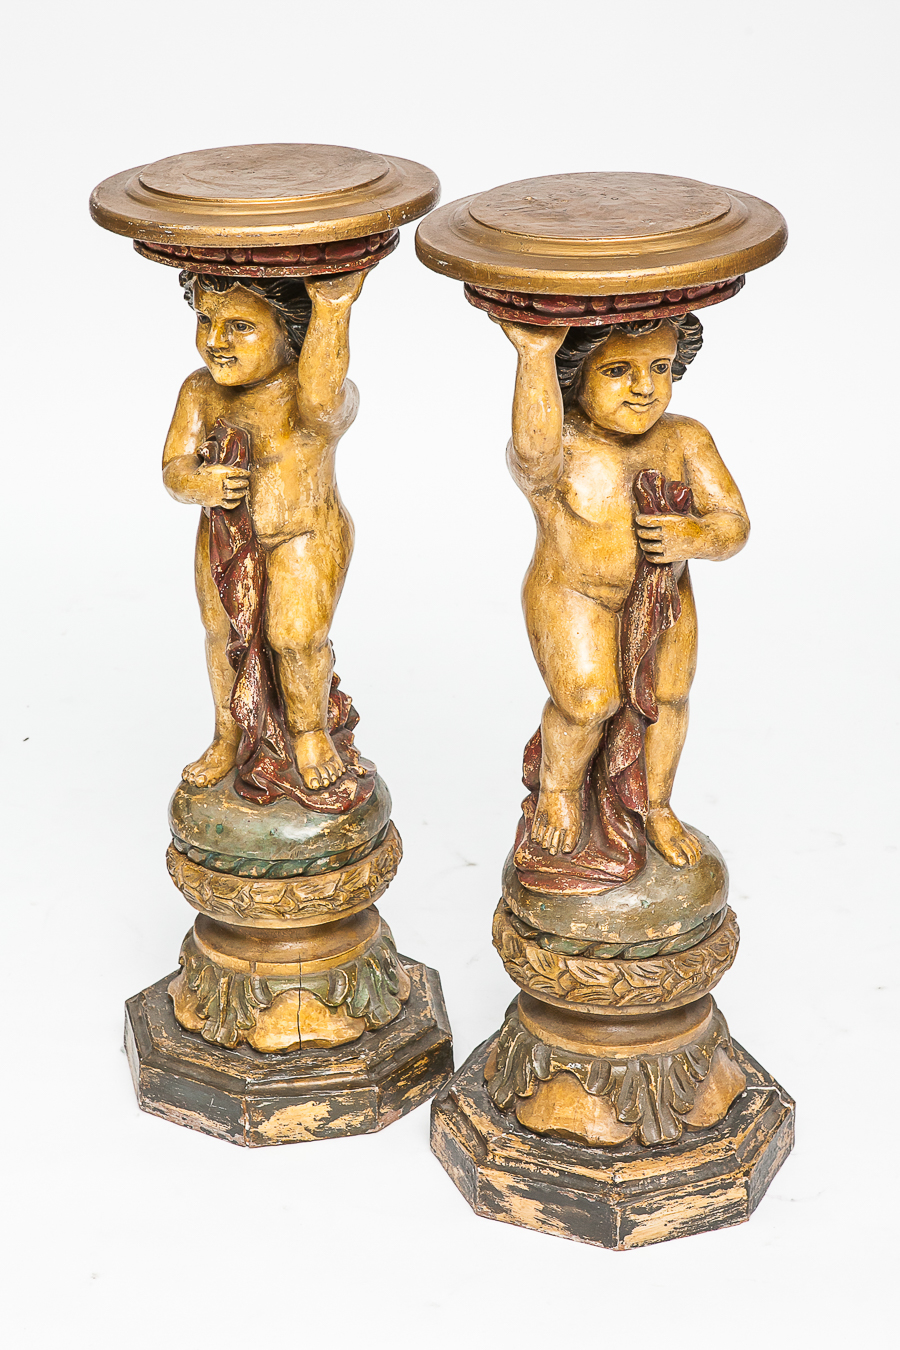 PAIR OF CARVED PAINTED FIGURAL JARDINIERE STANDS
modelled as putti holding robes and circular top